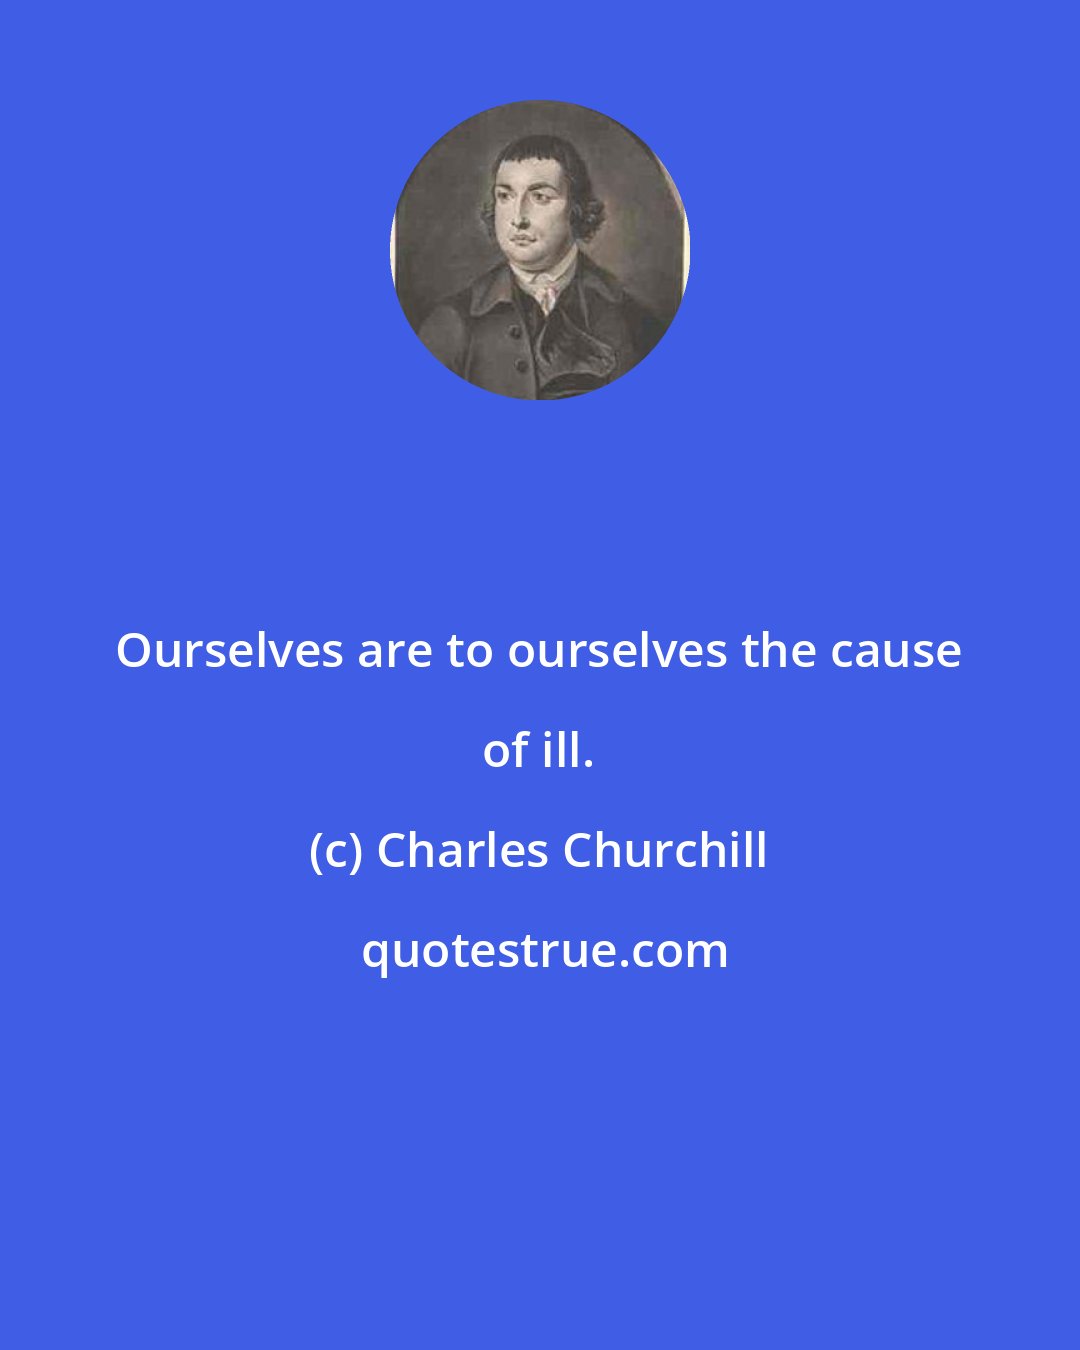 Charles Churchill: Ourselves are to ourselves the cause of ill.